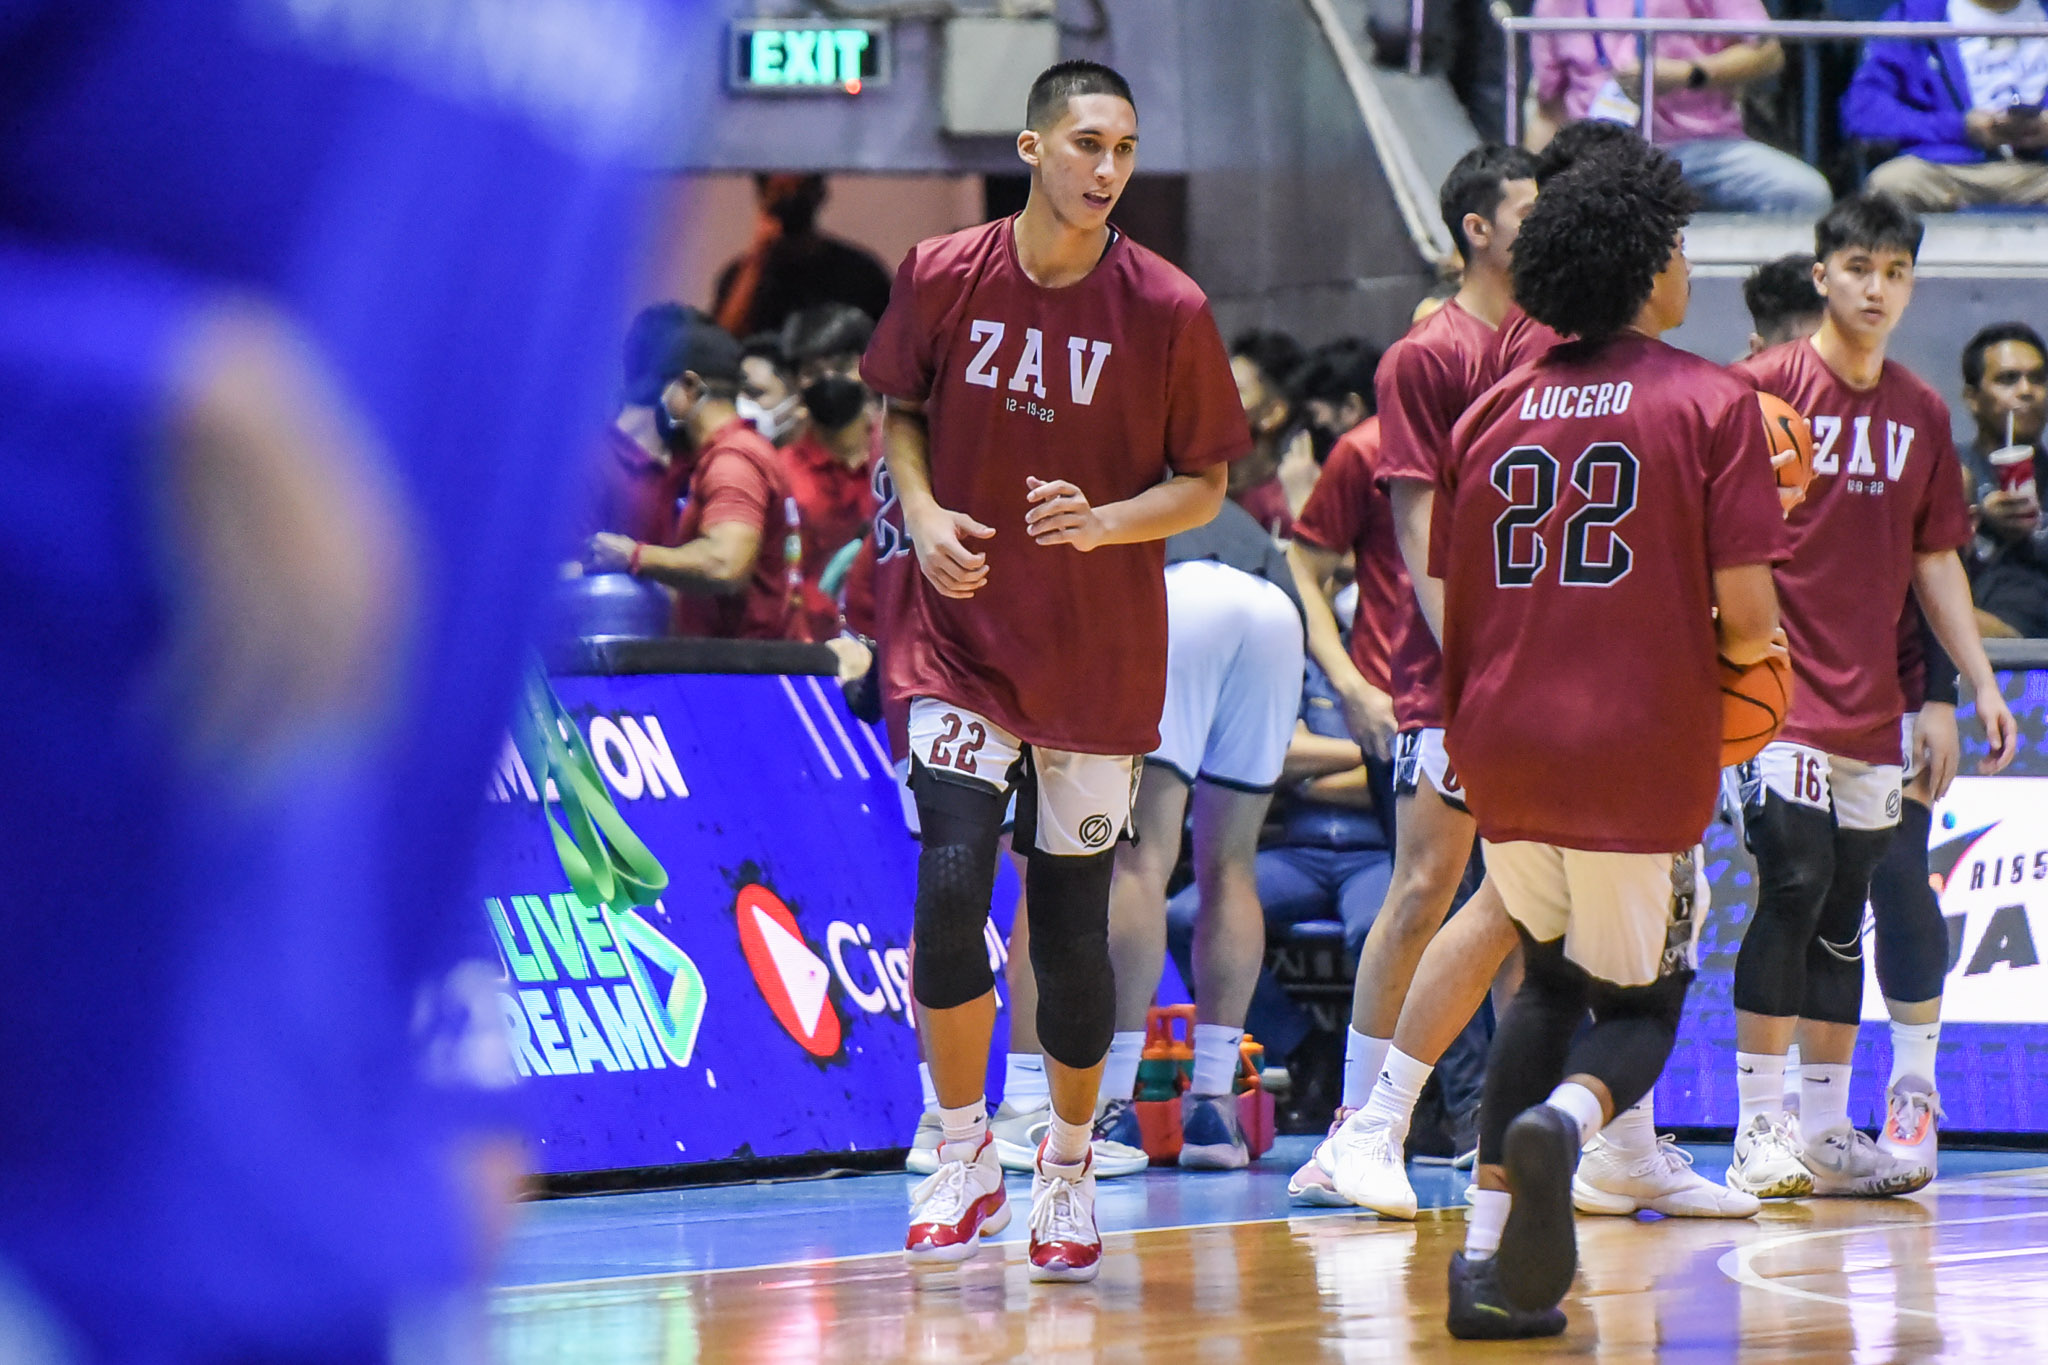 UAAP-85-MBB-Finals-G3-ADMU-vs.-UP-Zavier-Lucero-2029 Lucero says there's no final word yet on extent of injury as he joins UP shootaround Basketball News UAAP UP  - philippine sports news